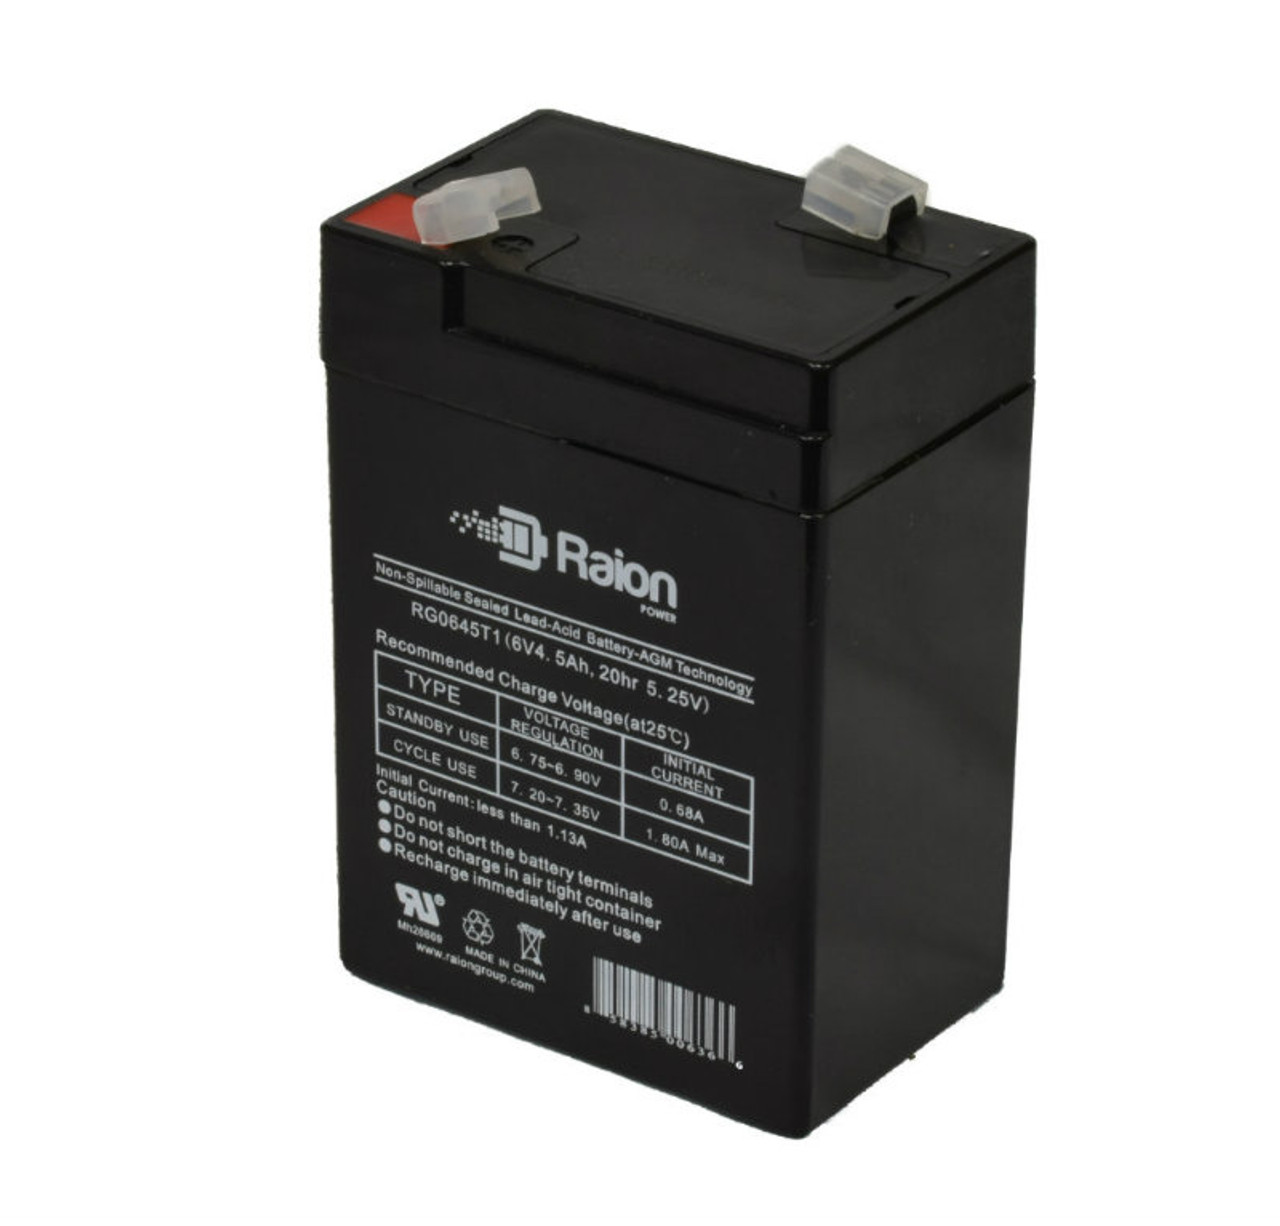 Raion Power RG0645T1 6V 4.5Ah Replacement Battery Cartridge for MHB MS5-6